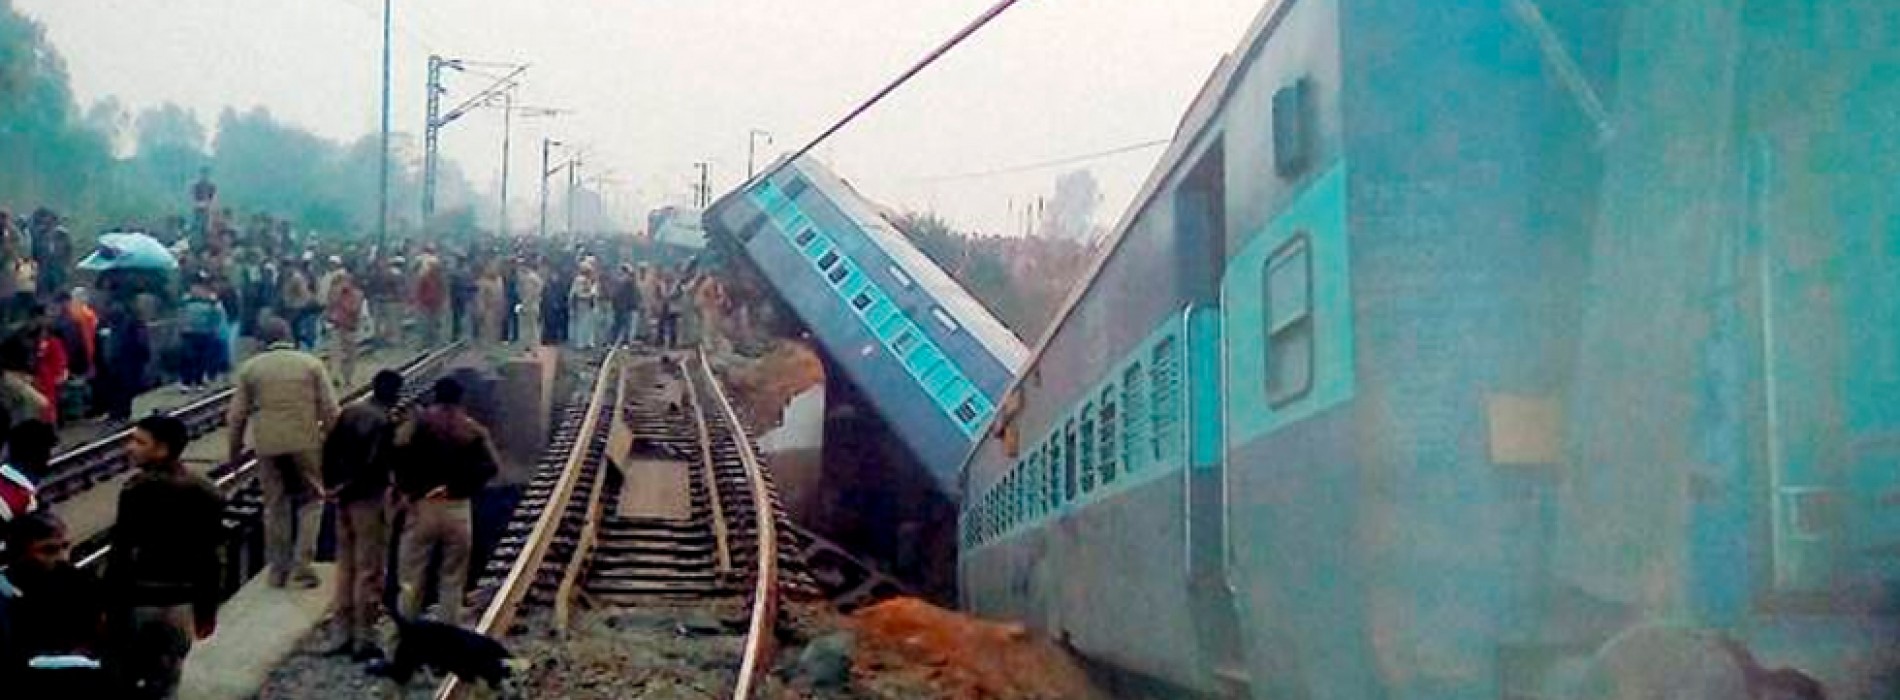 Villagers avert major train accident in West Bengal